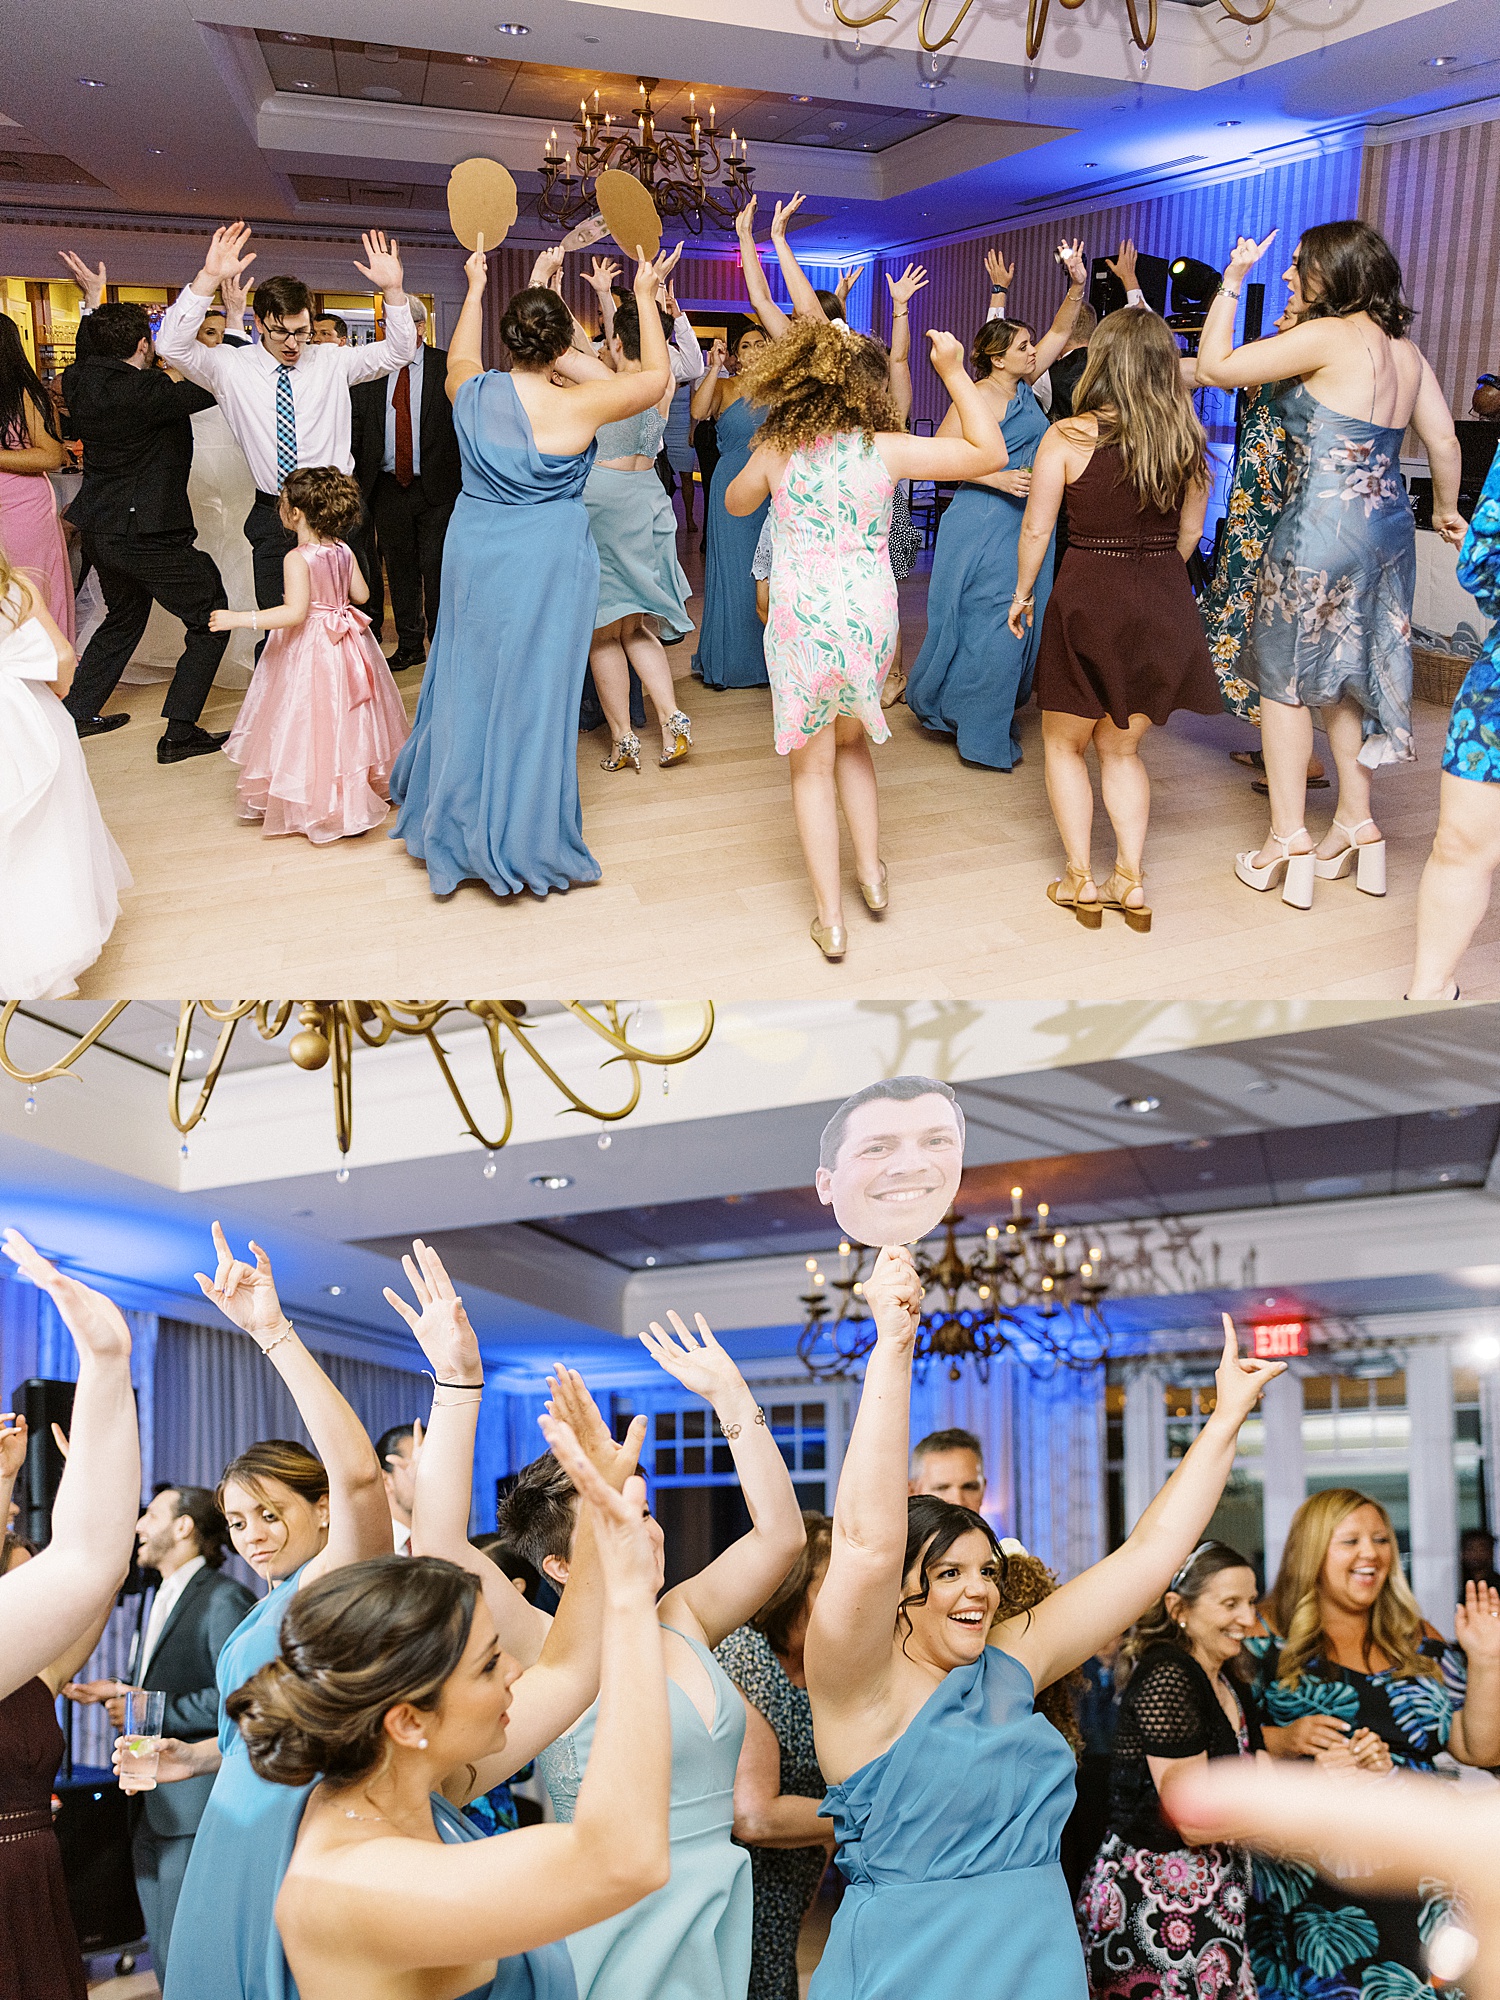 Guests dancing on reception floor by Lynne Reznick photography